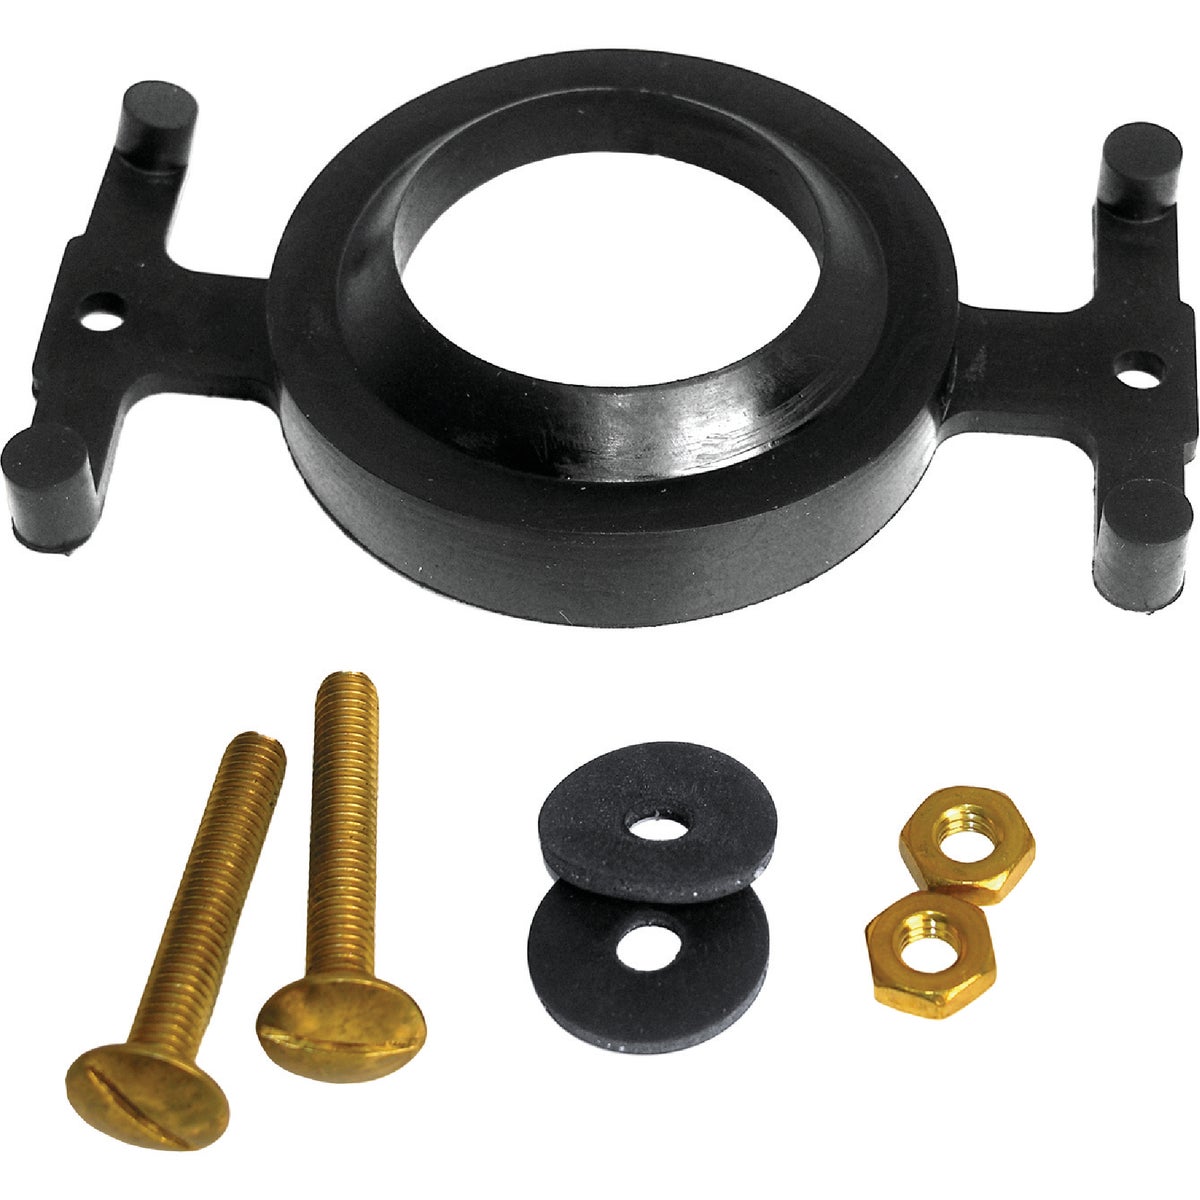 Lasco Eljer Tank To Bowl Bolts and Gasket with Ears 